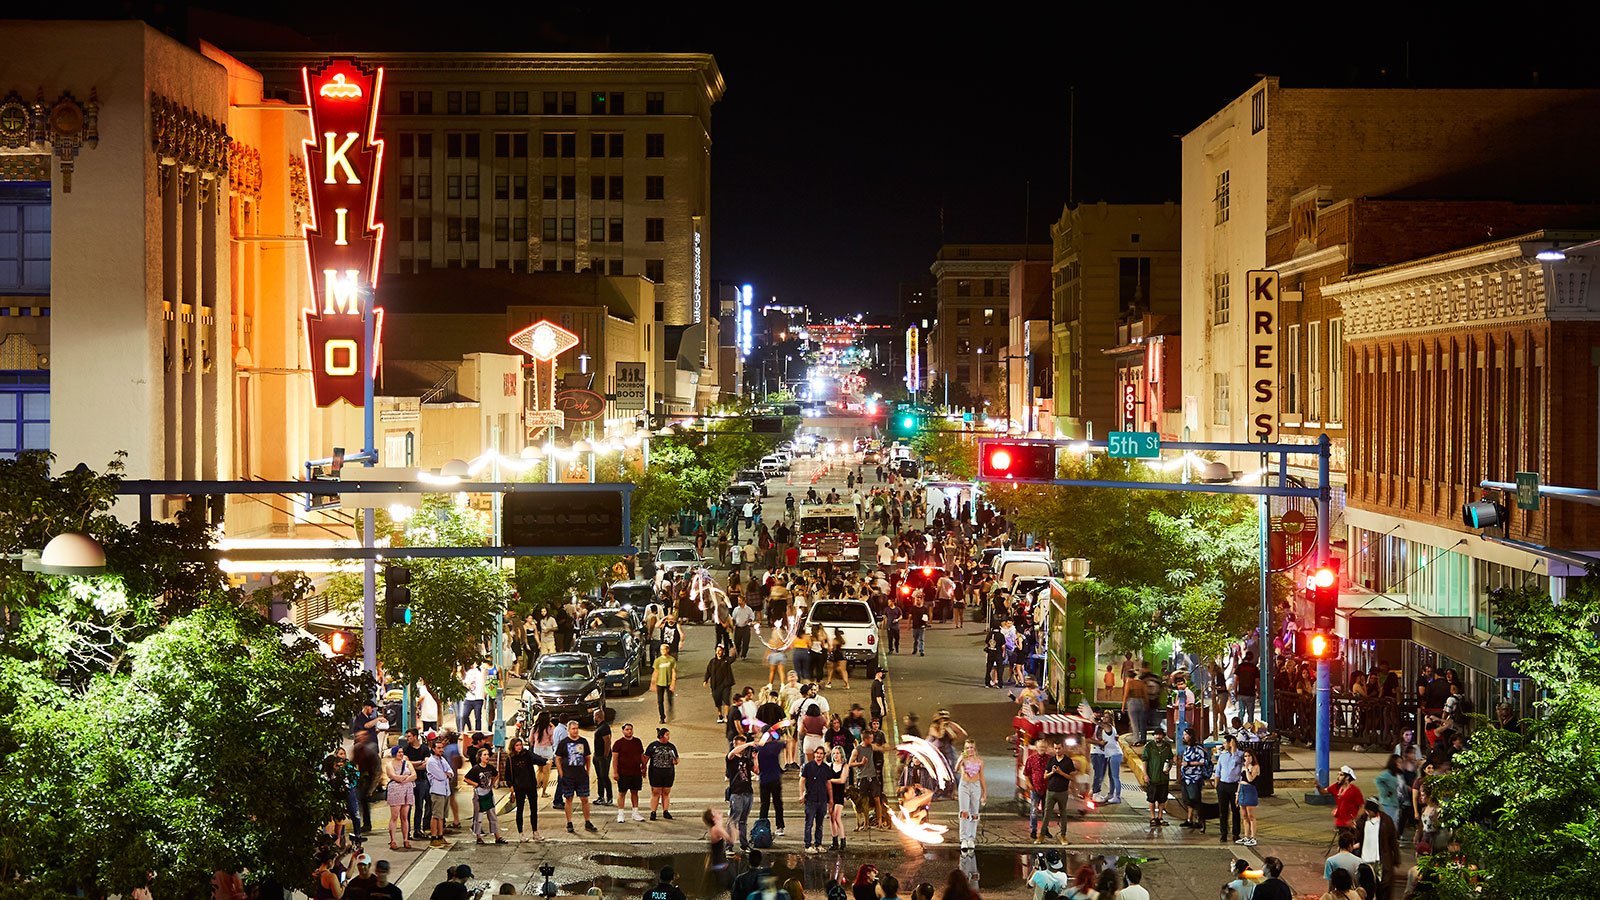 Night time scene of crowds on Central in front of the KiMo Theater